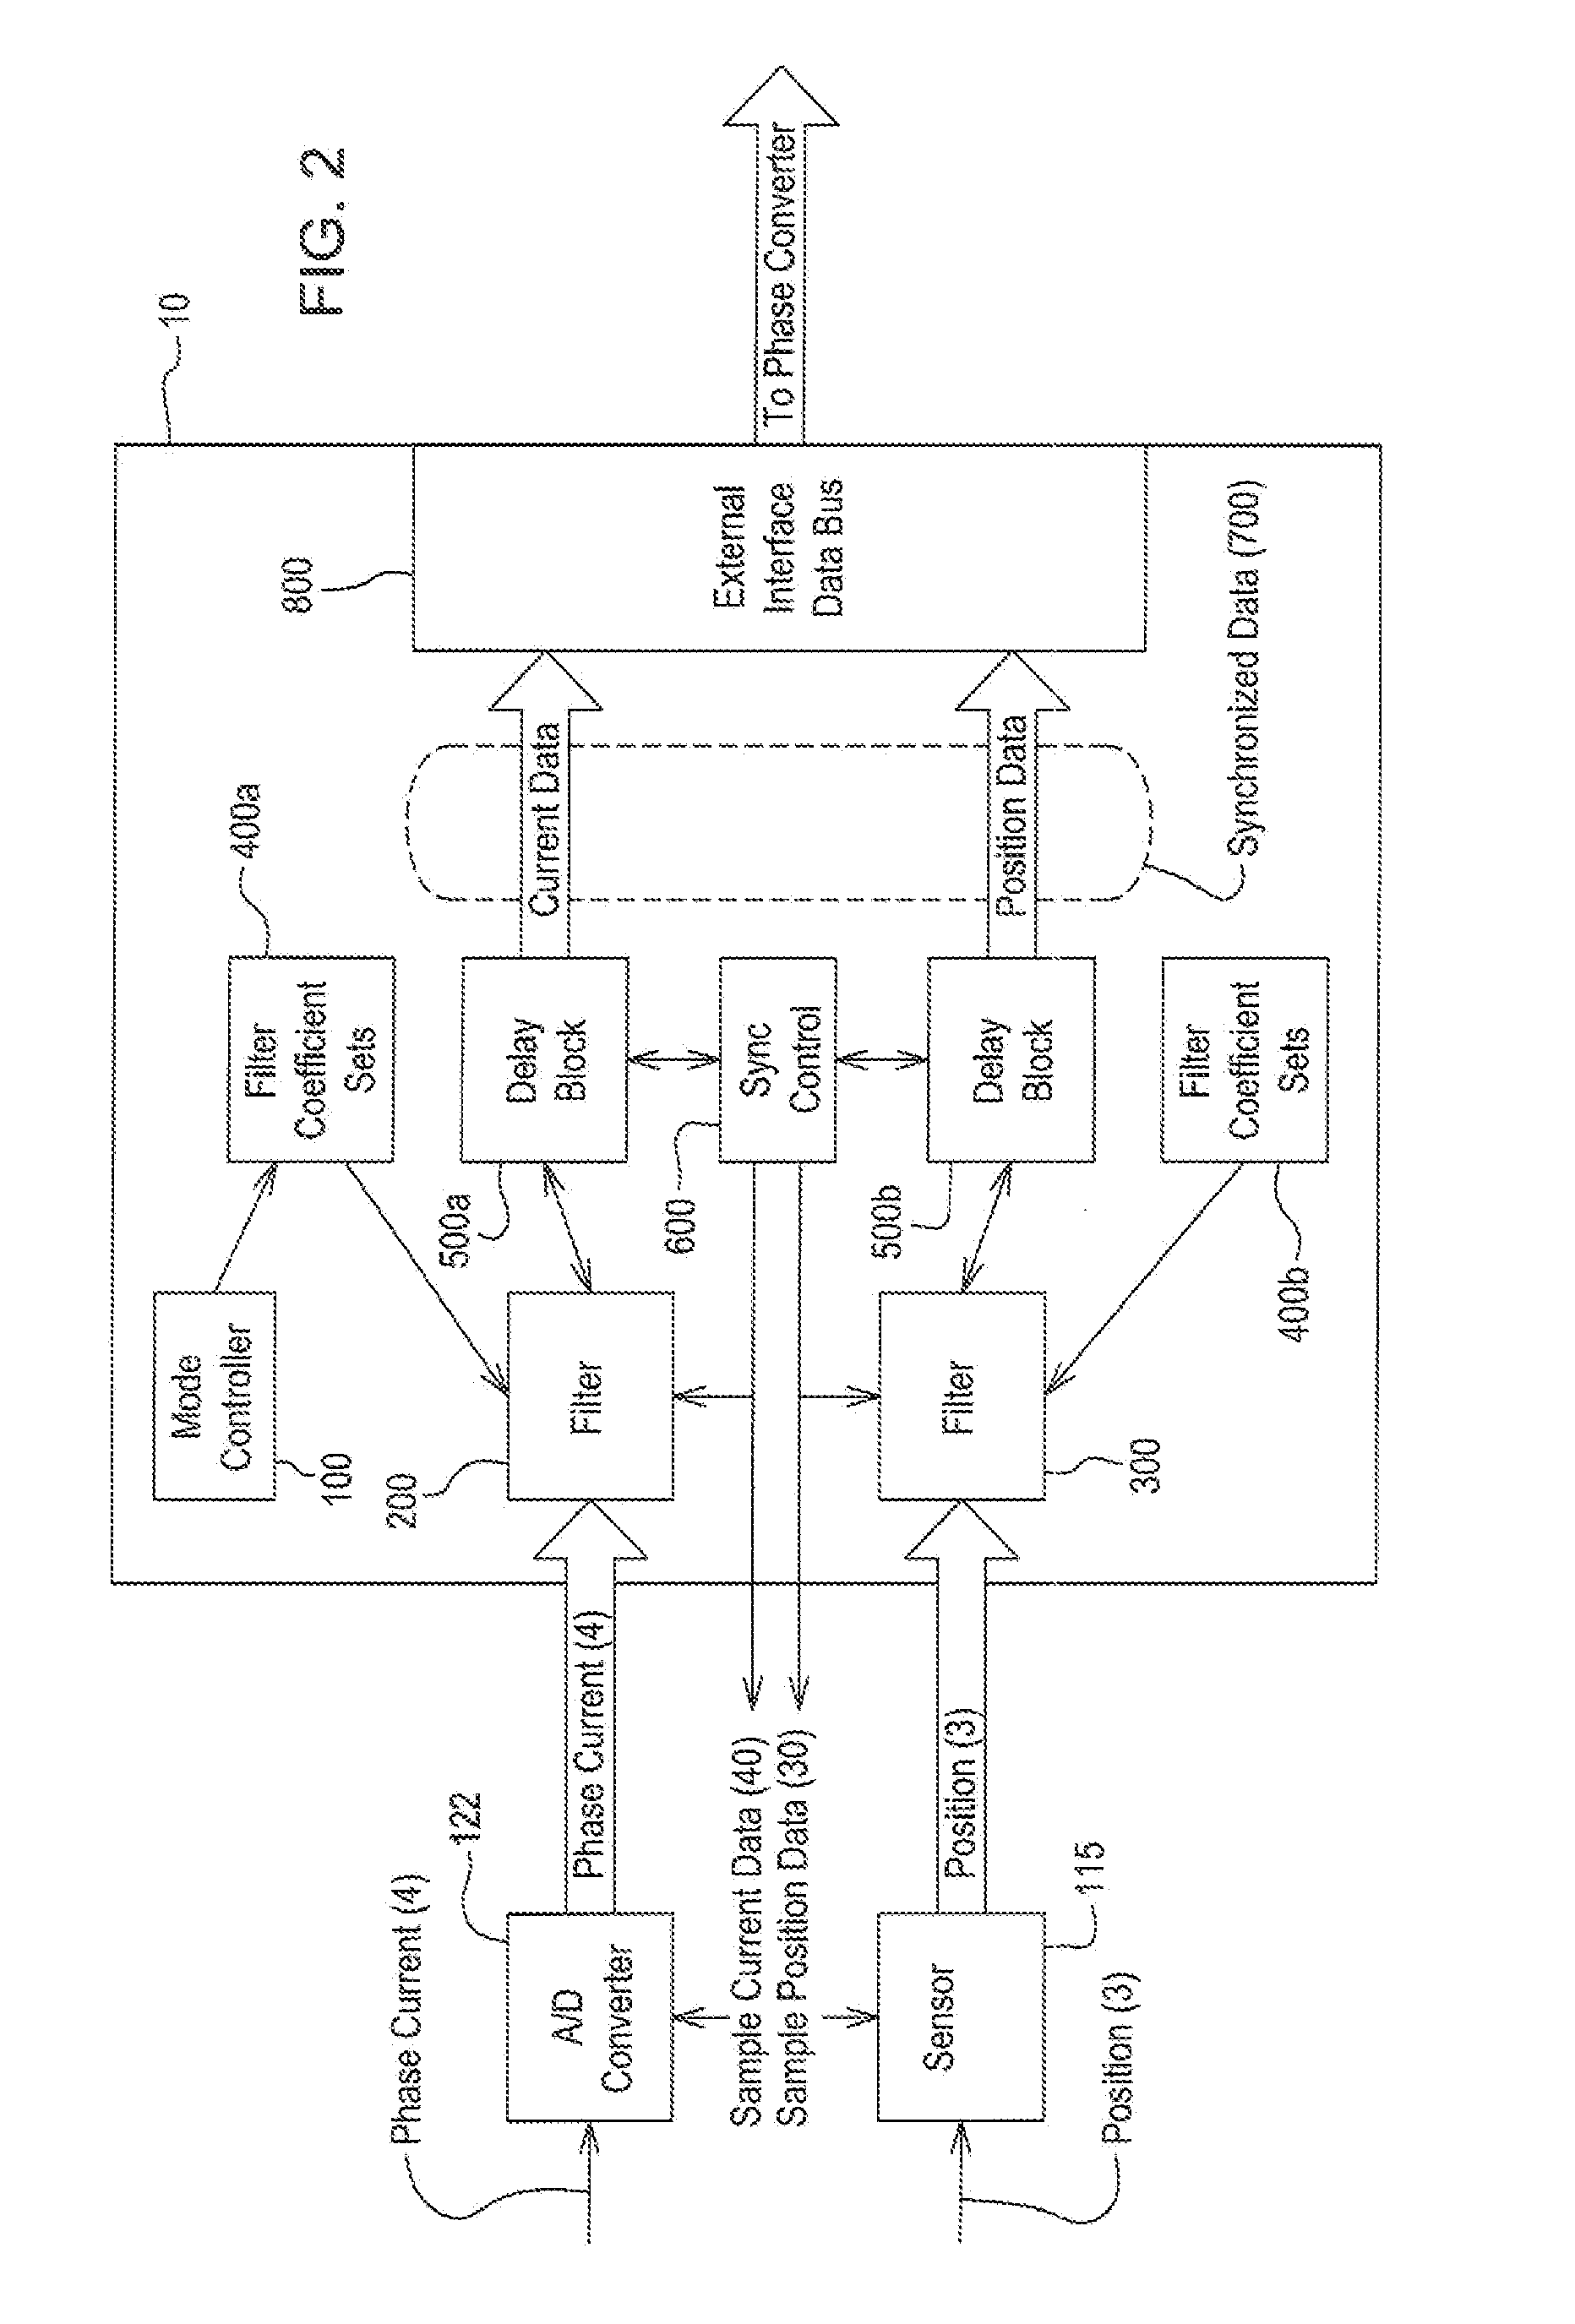 Synchronization of Position and Current Measurements in an Electric Motor Control Application using an FPGA